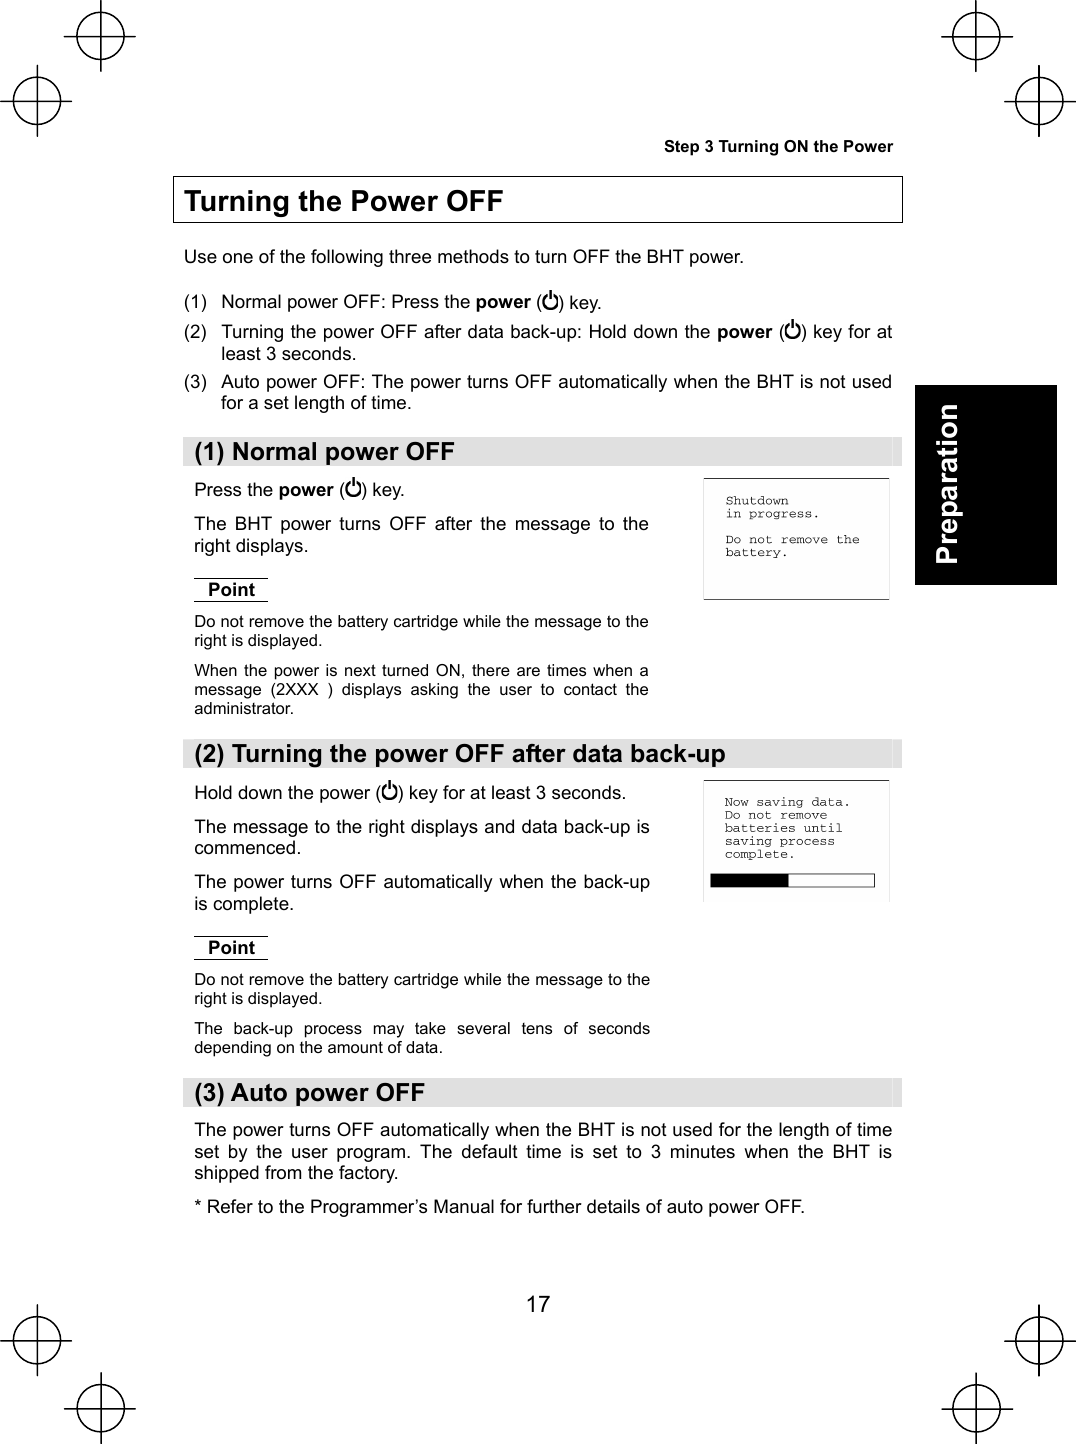  17 Preparation    Turning the Power OFF  Use one of the following three methods to turn OFF the BHT power.  (1)  Normal power OFF: Press the power ( ) key. (2)  Turning the power OFF after data back-up: Hold down the power ( ) key for at least 3 seconds. (3)  Auto power OFF: The power turns OFF automatically when the BHT is not used for a set length of time.  (1) Normal power OFF Press the power () key. The BHT power turns OFF after the message to the right displays.  Point Do not remove the battery cartridge while the message to the right is displayed. When the power is next turned ON, there are times when a message (2XXX ) displays asking the user to contact the administrator.   (2) Turning the power OFF after data back-up Hold down the power () key for at least 3 seconds. The message to the right displays and data back-up is commenced. The power turns OFF automatically when the back-up is complete.  Point Do not remove the battery cartridge while the message to the right is displayed. The back-up process may take several tens of seconds depending on the amount of data.   (3) Auto power OFF The power turns OFF automatically when the BHT is not used for the length of time set by the user program. The default time is set to 3 minutes when the BHT is shipped from the factory. * Refer to the Programmer’s Manual for further details of auto power OFF.   Step 3 Turning ON the Power